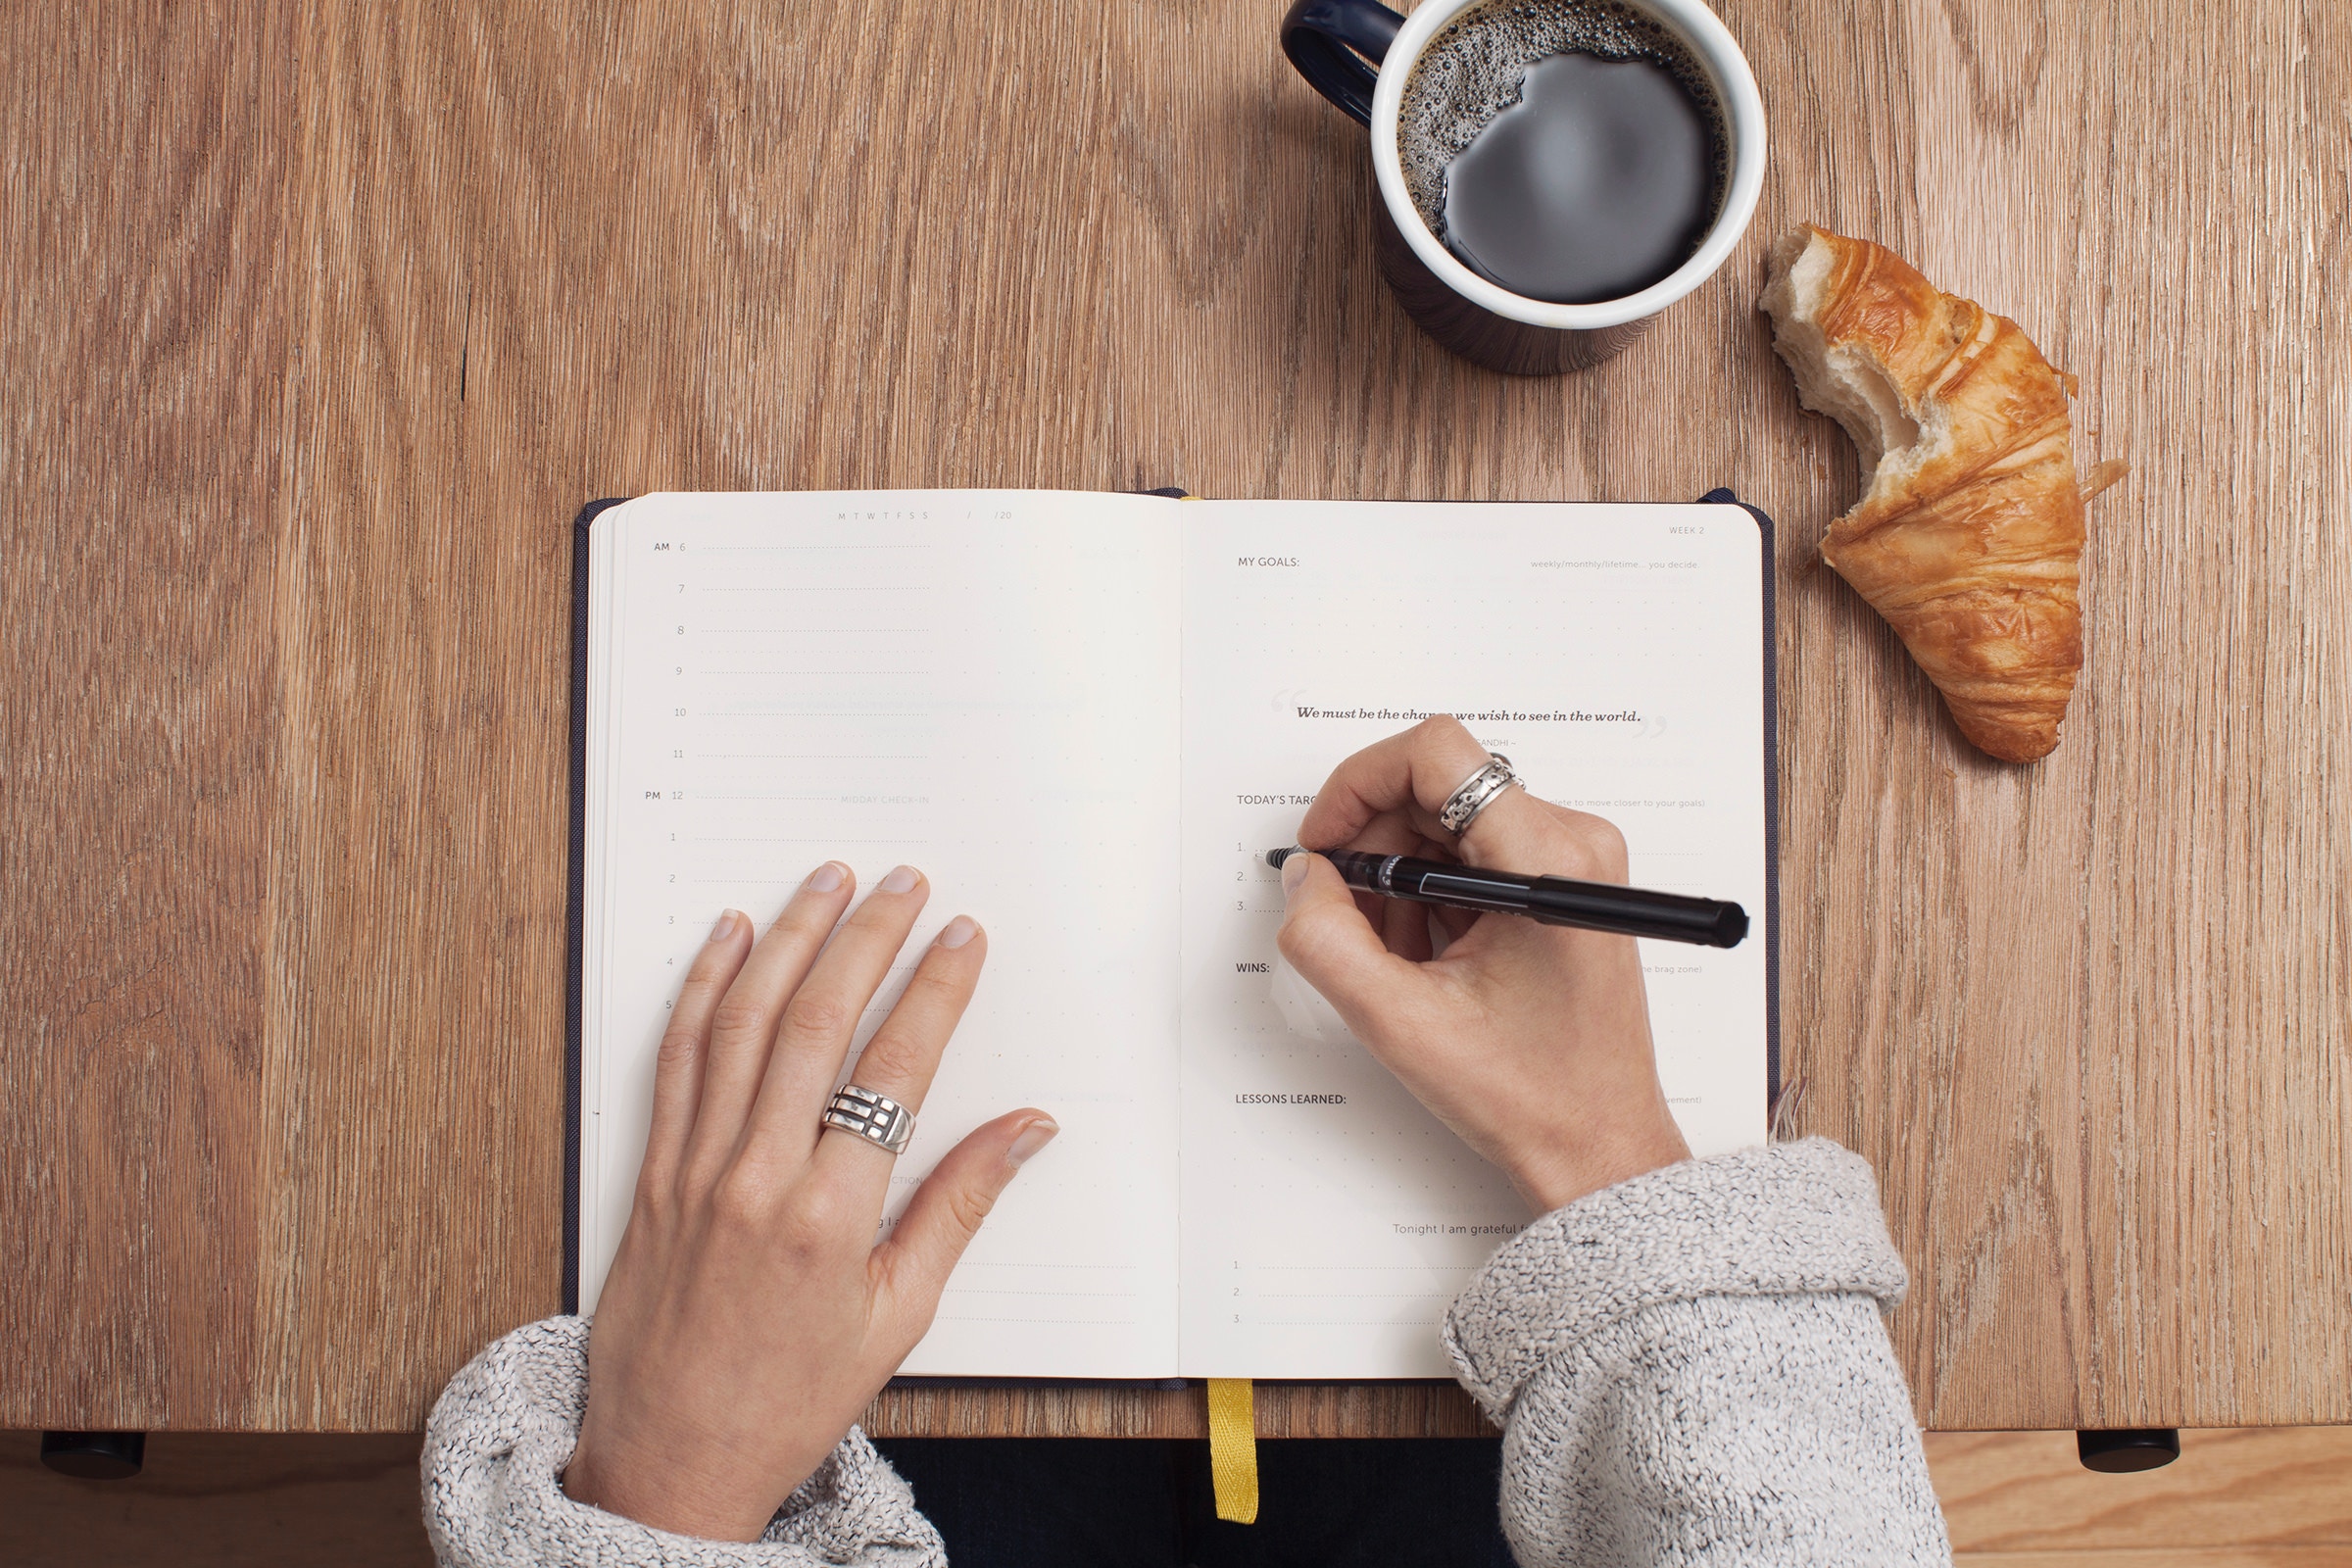 Northlands Parkway Collegiate - Journaling is a great tool to improve all  areas of health! There are many great articles and suggestions online to  get you startedTechniques range from gratitude to